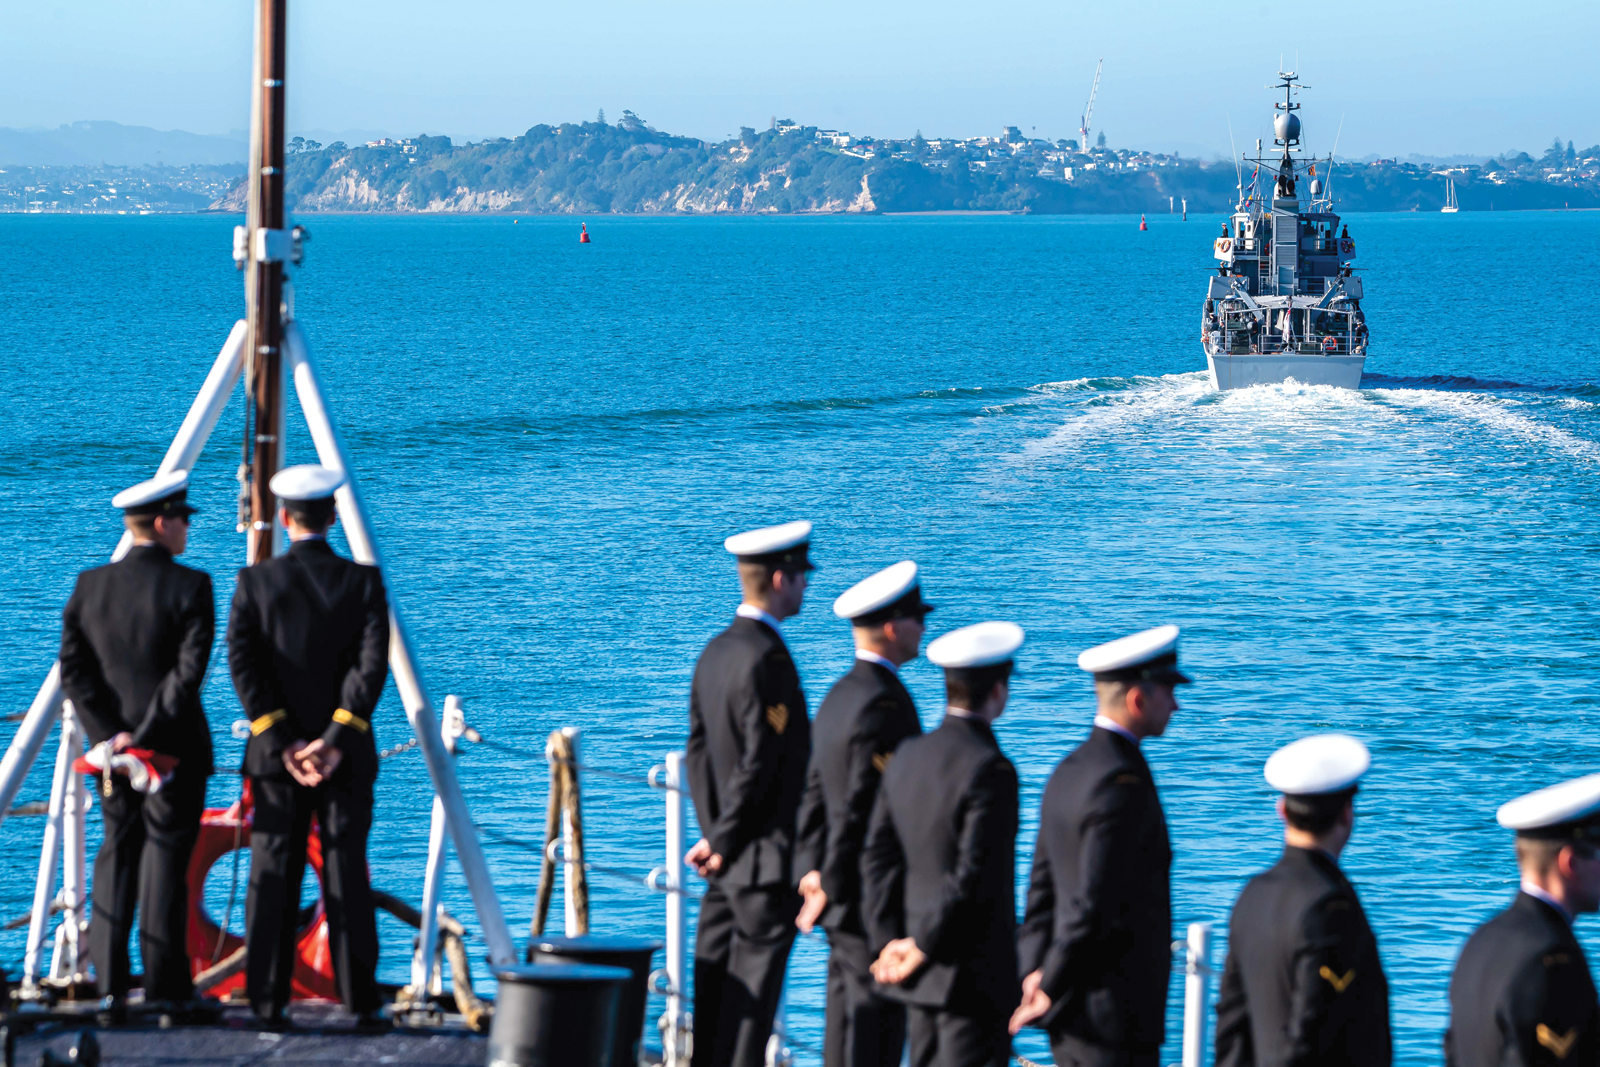 Royal Canadian Navy sailors aboard HMCS Calgary stand at ease on the forecastle as the ship is escorted into Auckland by HMNZS Taupo. Photos by Corporal Lynette Ai Dang, Canadian Armed Forces Photo